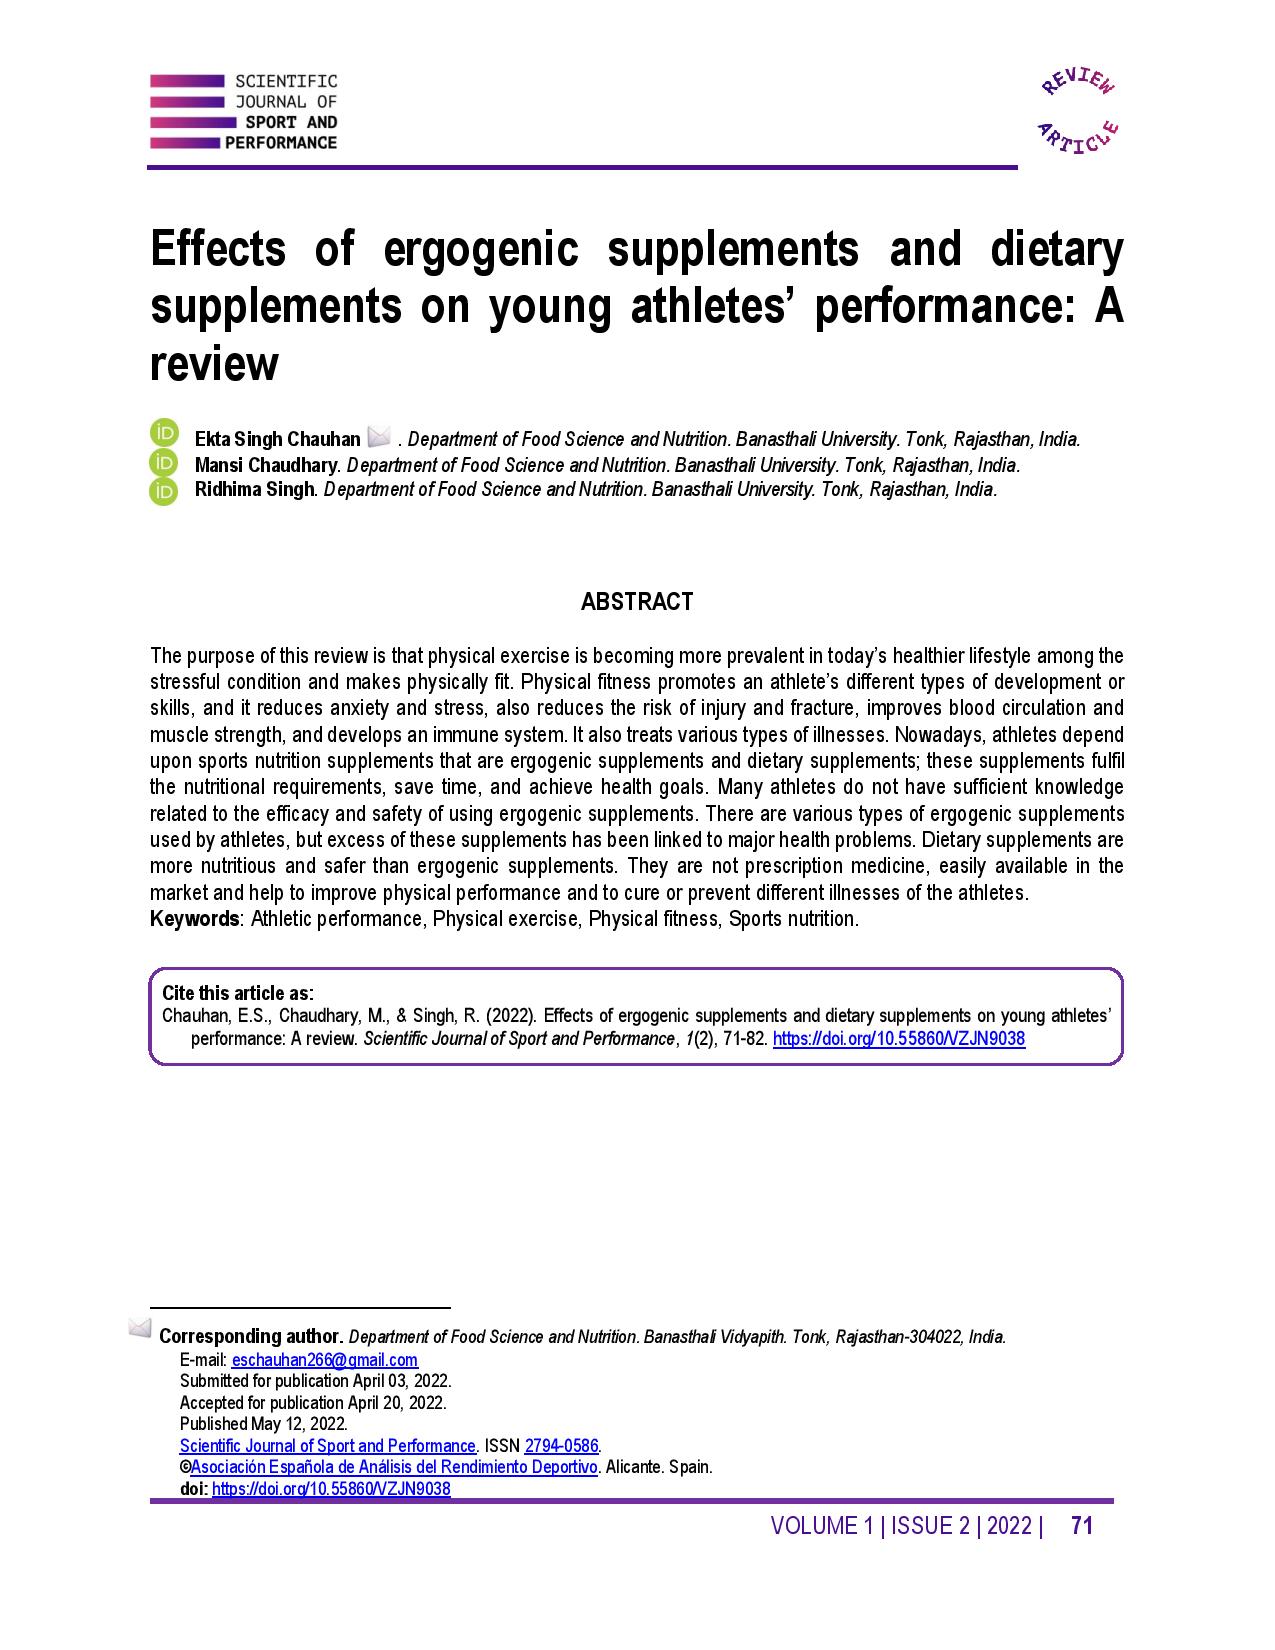 Effects of ergogenic supplements and dietary supplements on young athletes’ performance: A review